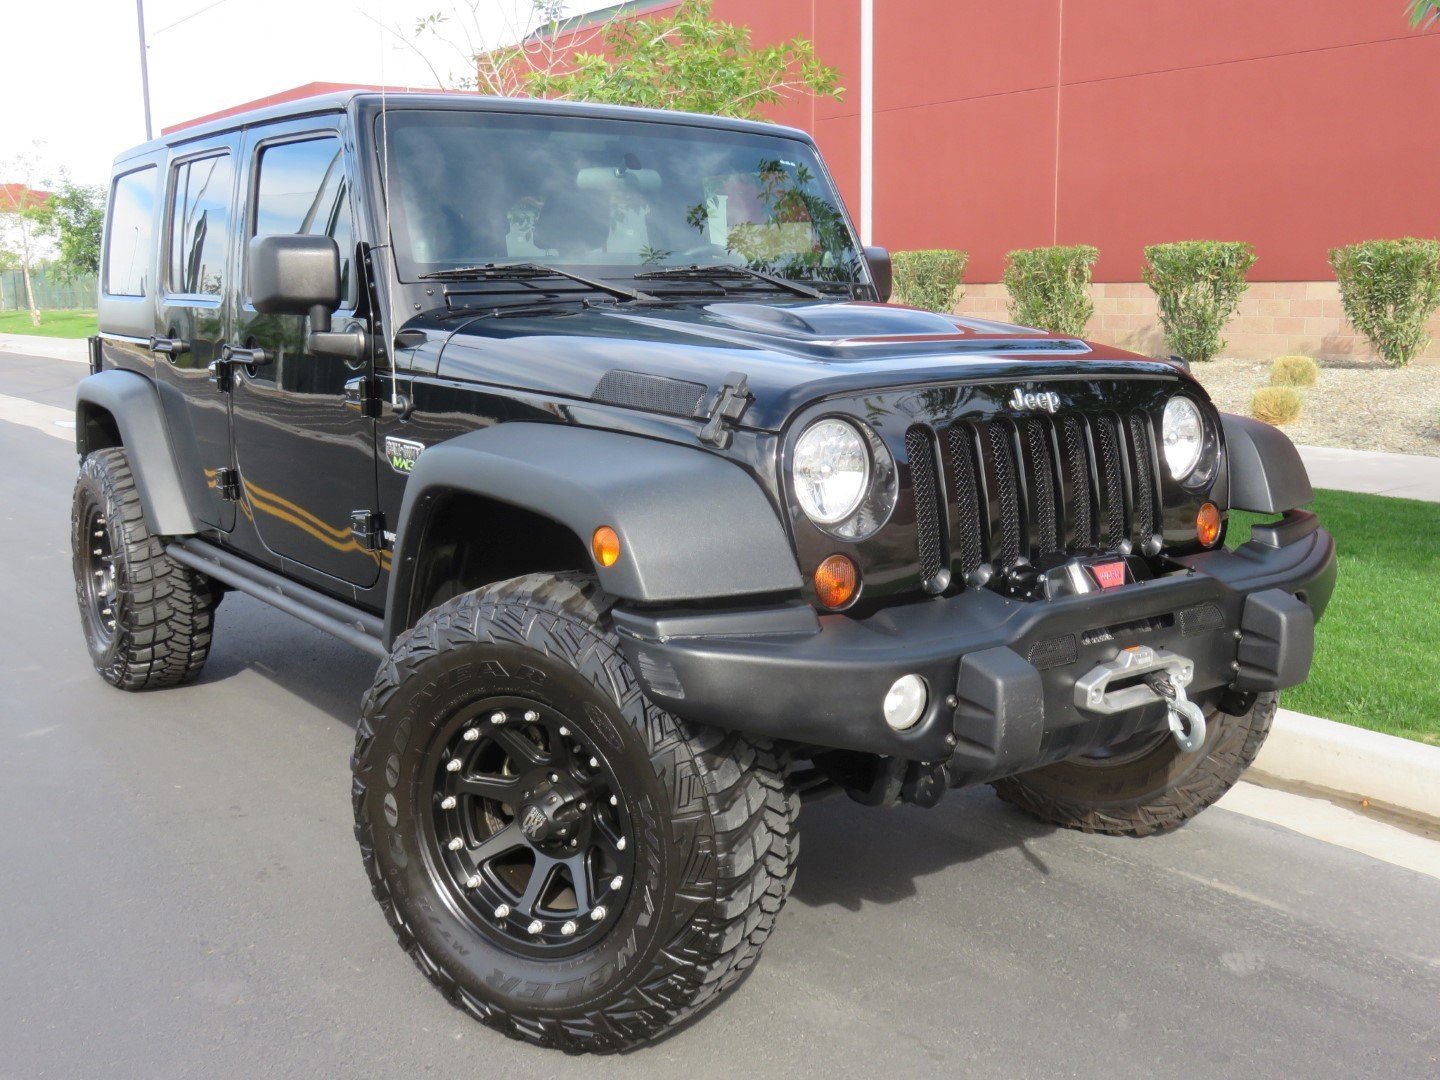 2012 Jeep Wrangler Unlimited | Canyon State Classics